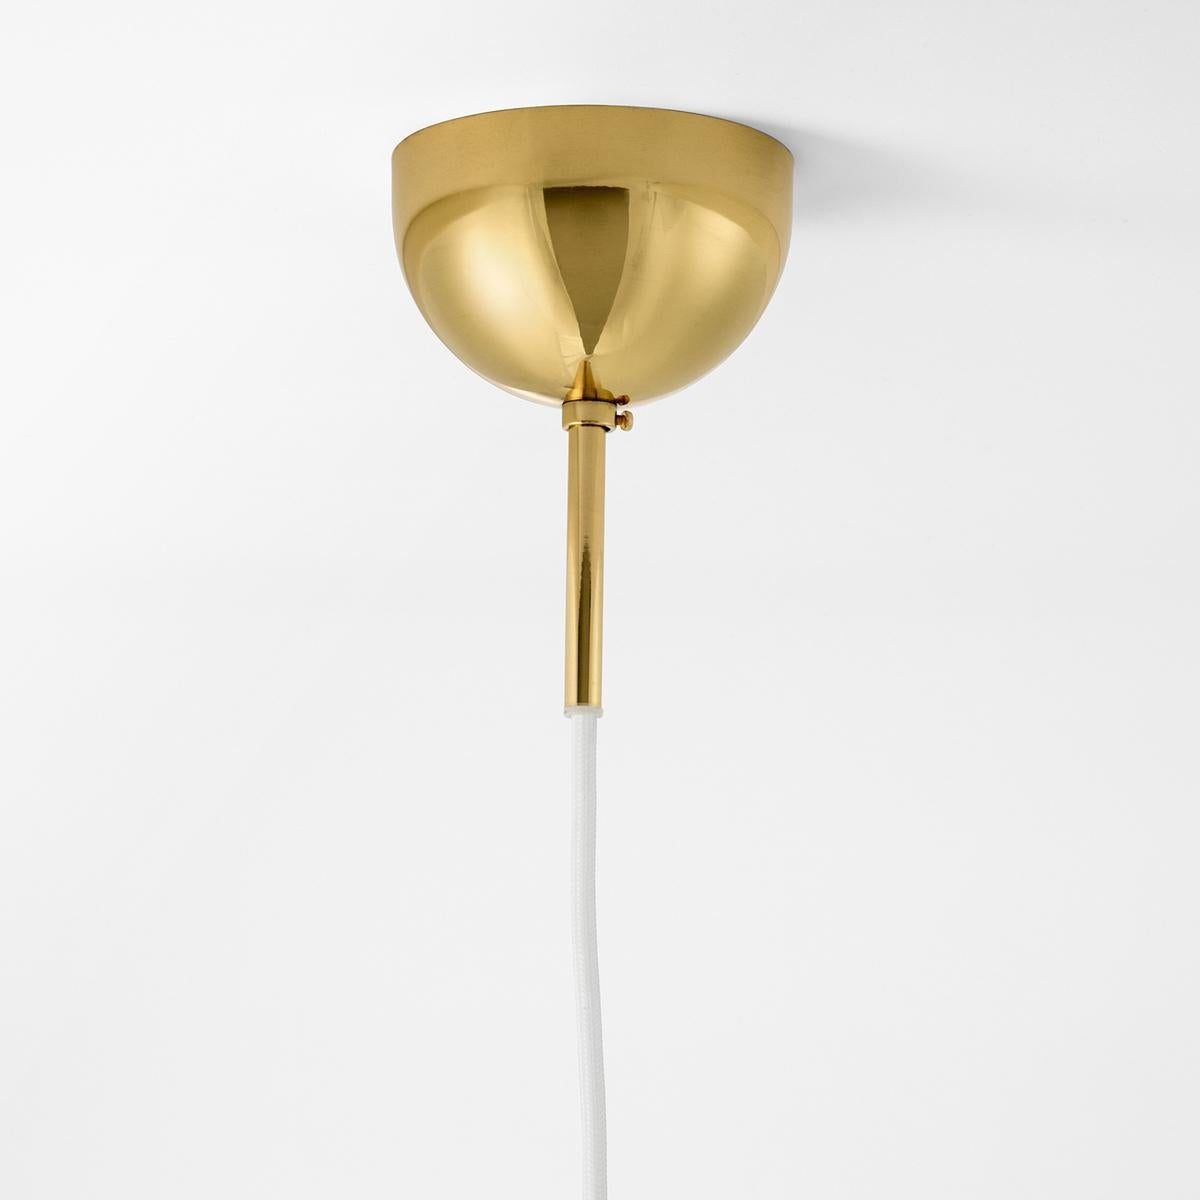 Hand-Crafted Contemporary Josef Frank Lampshade With Brass Canope Sewn 2560 Pendant by Svensk